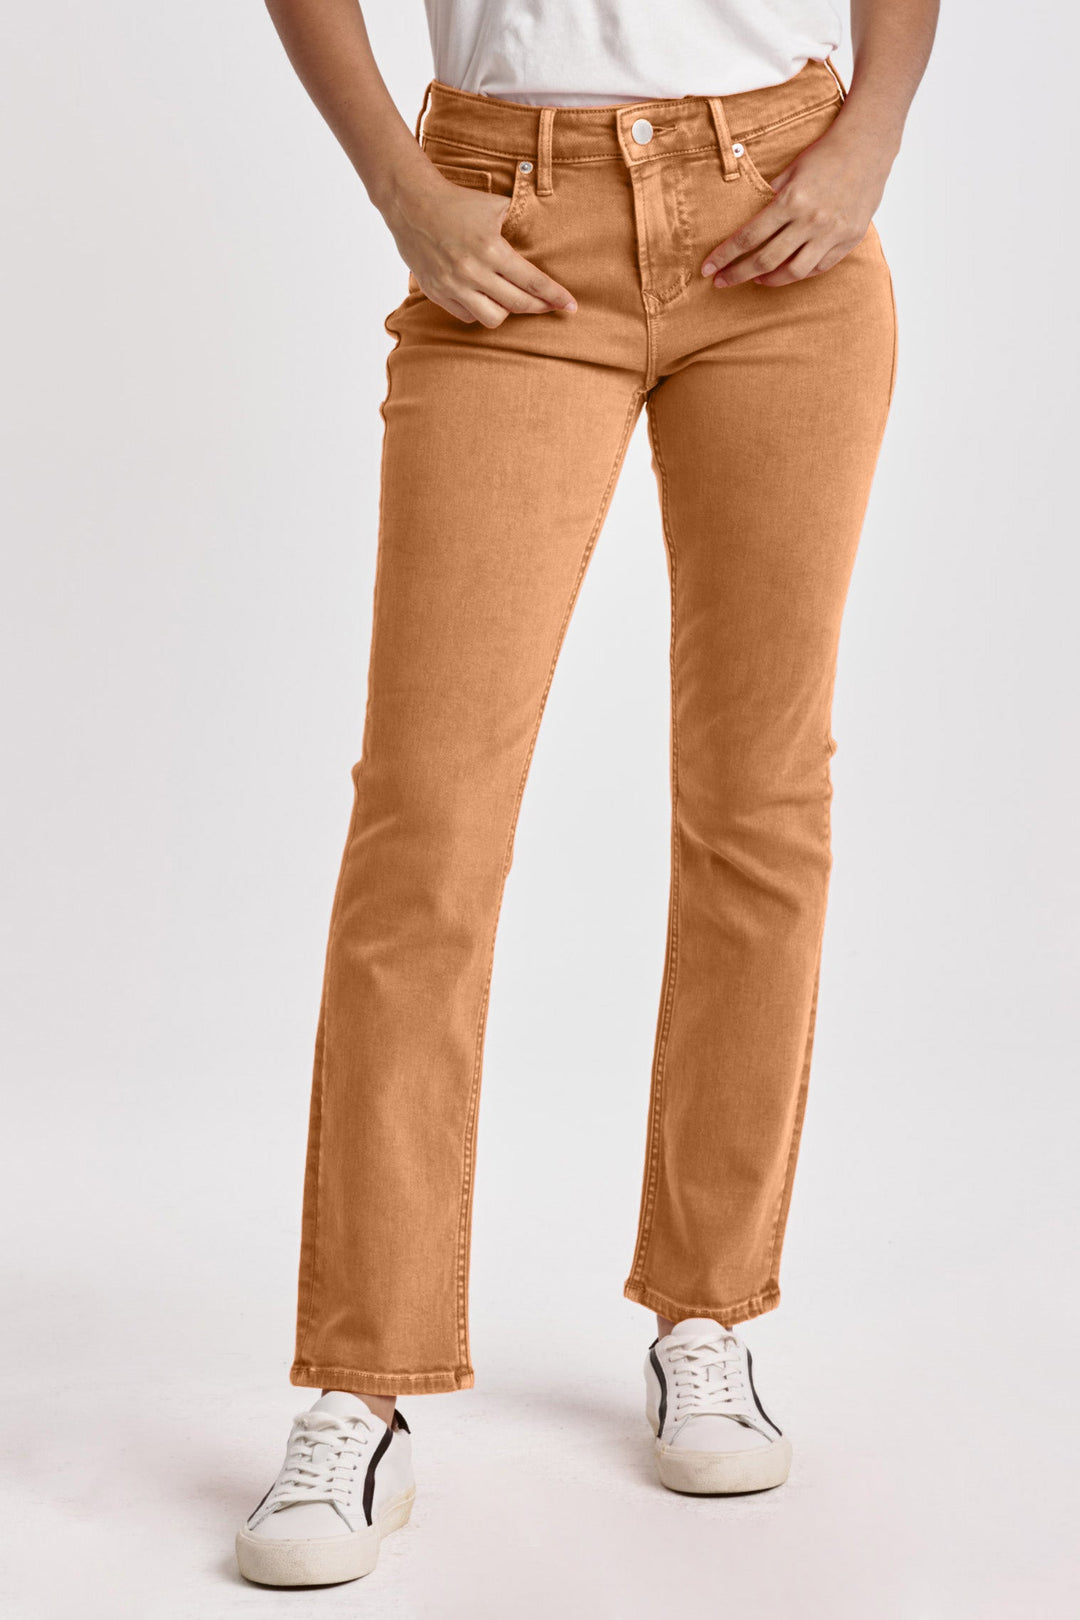 blaire-high-rise-slim-straight-jeans-apricot-crush